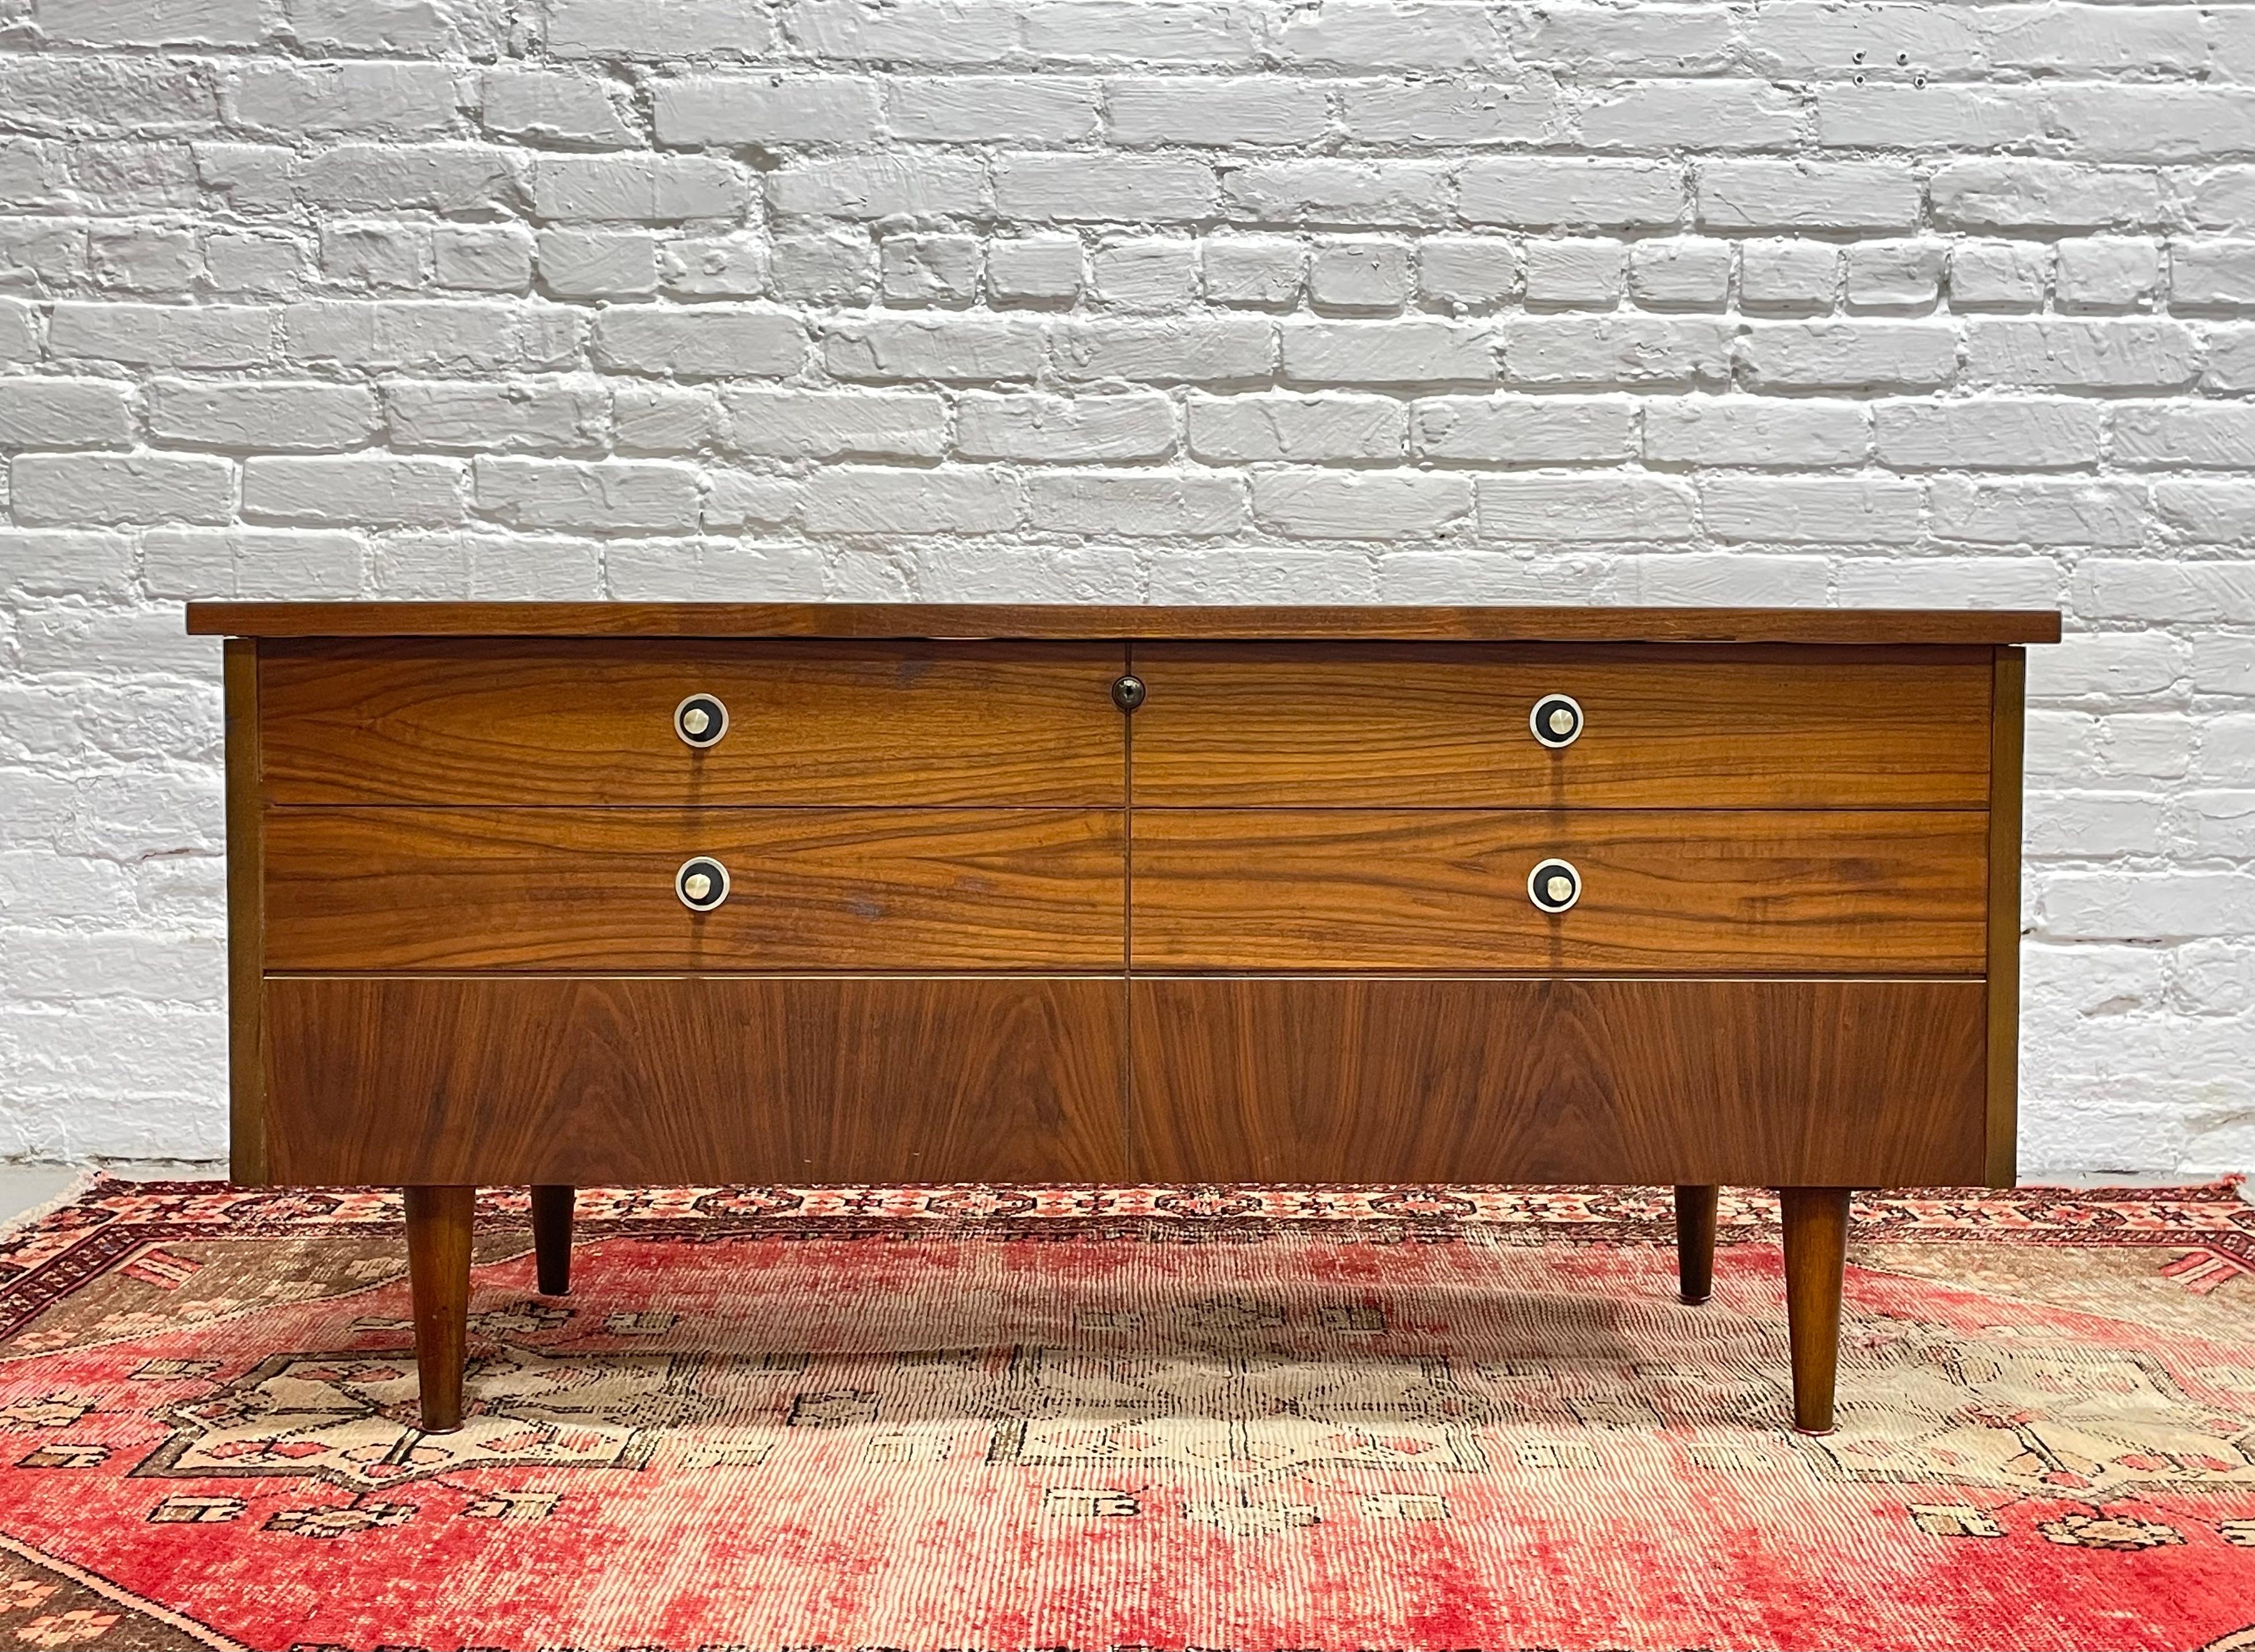 ** Please note that the lock mechanism will be disabled for safety compliance. Lane sends a free replacement safety lock upon request.**

Mid Century Modern walnut chest / bench by Lane in nearly new condition.  This chest is perfect for storing